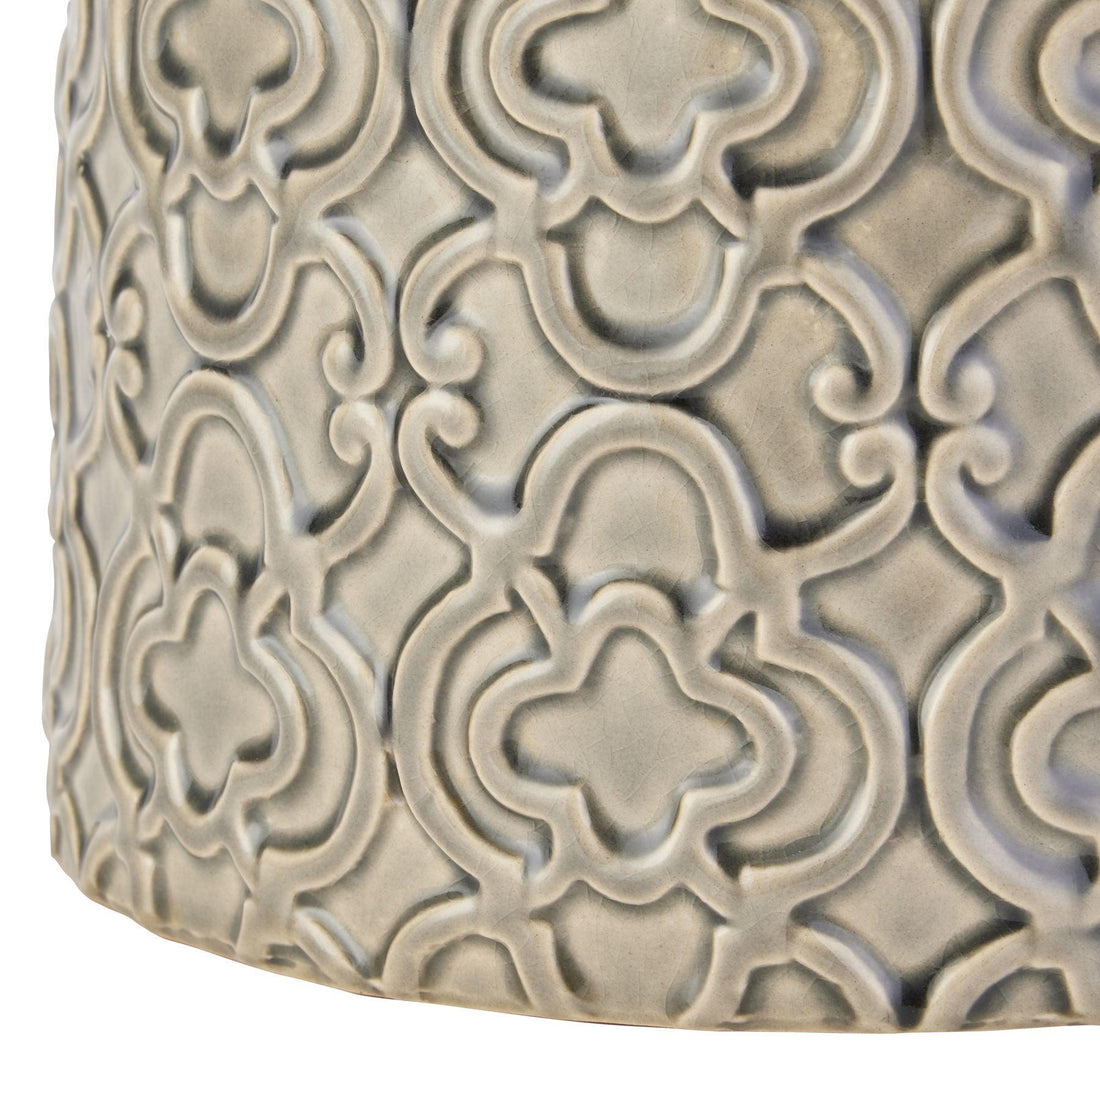 Seville Collection Grey Marrakesh Urn - £59.95 - Gifts & Accessories > Ornaments 